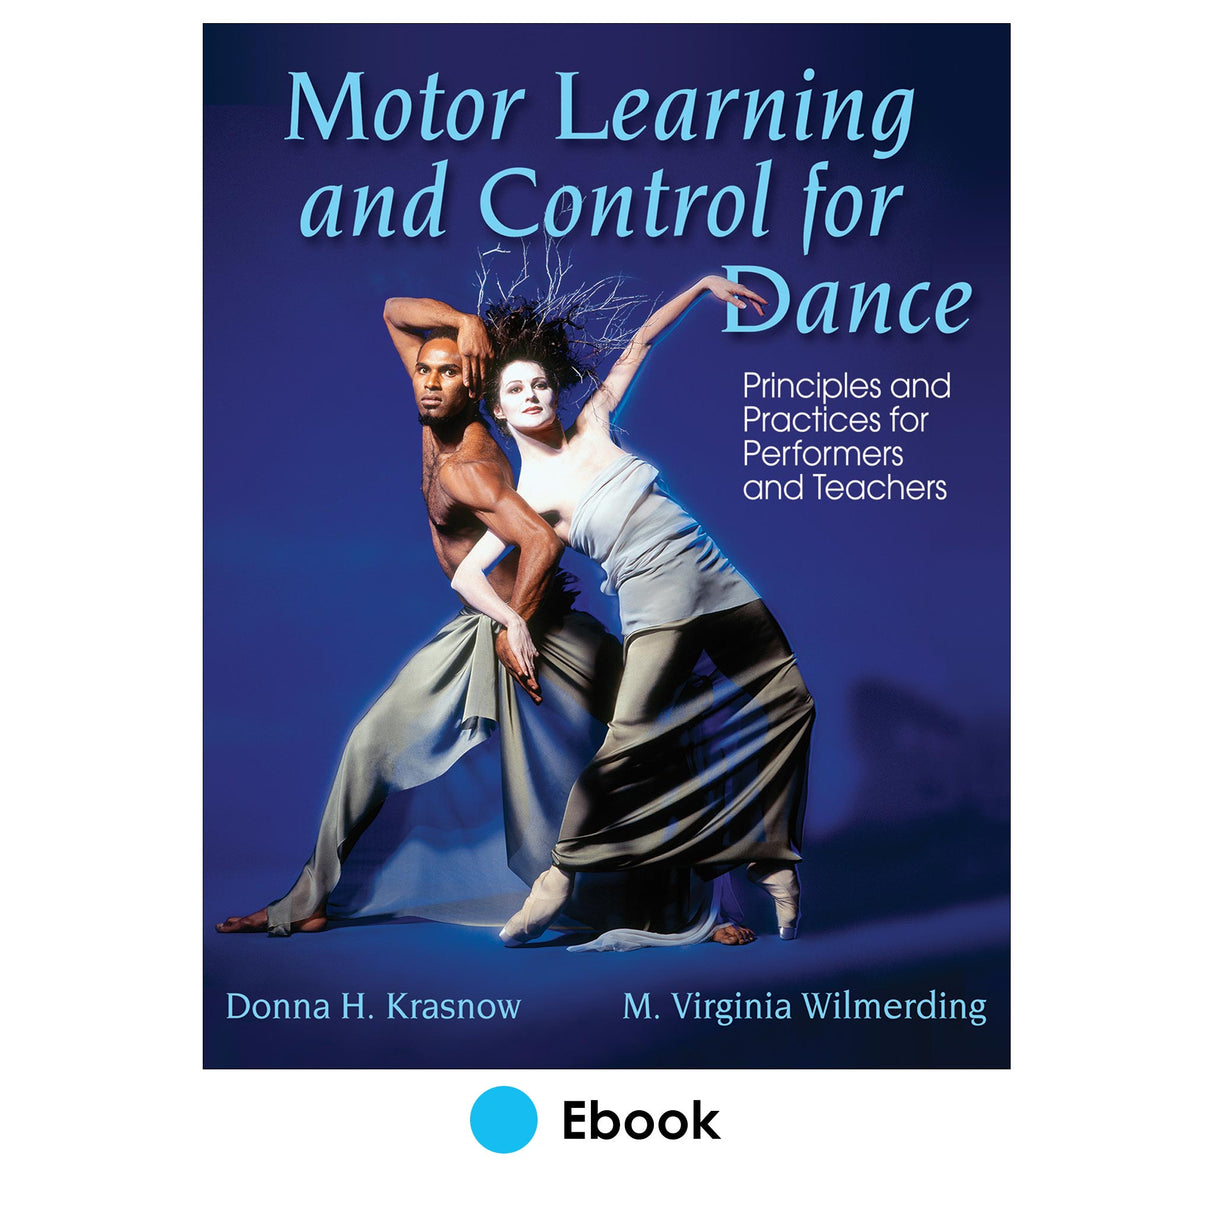 Motor Learning and Control for Dance PDF